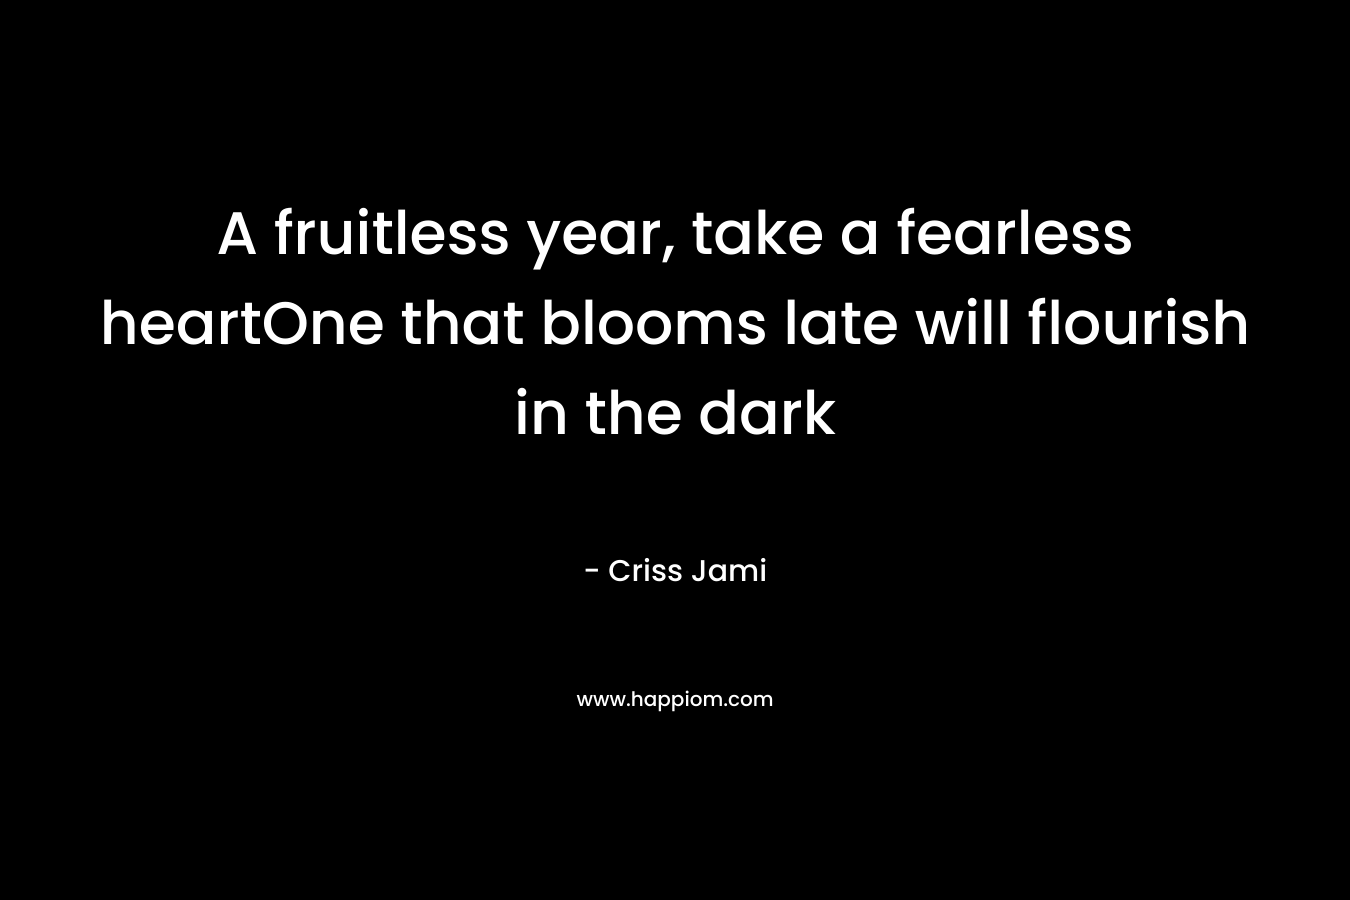 A fruitless year, take a fearless heartOne that blooms late will flourish in the dark – Criss Jami